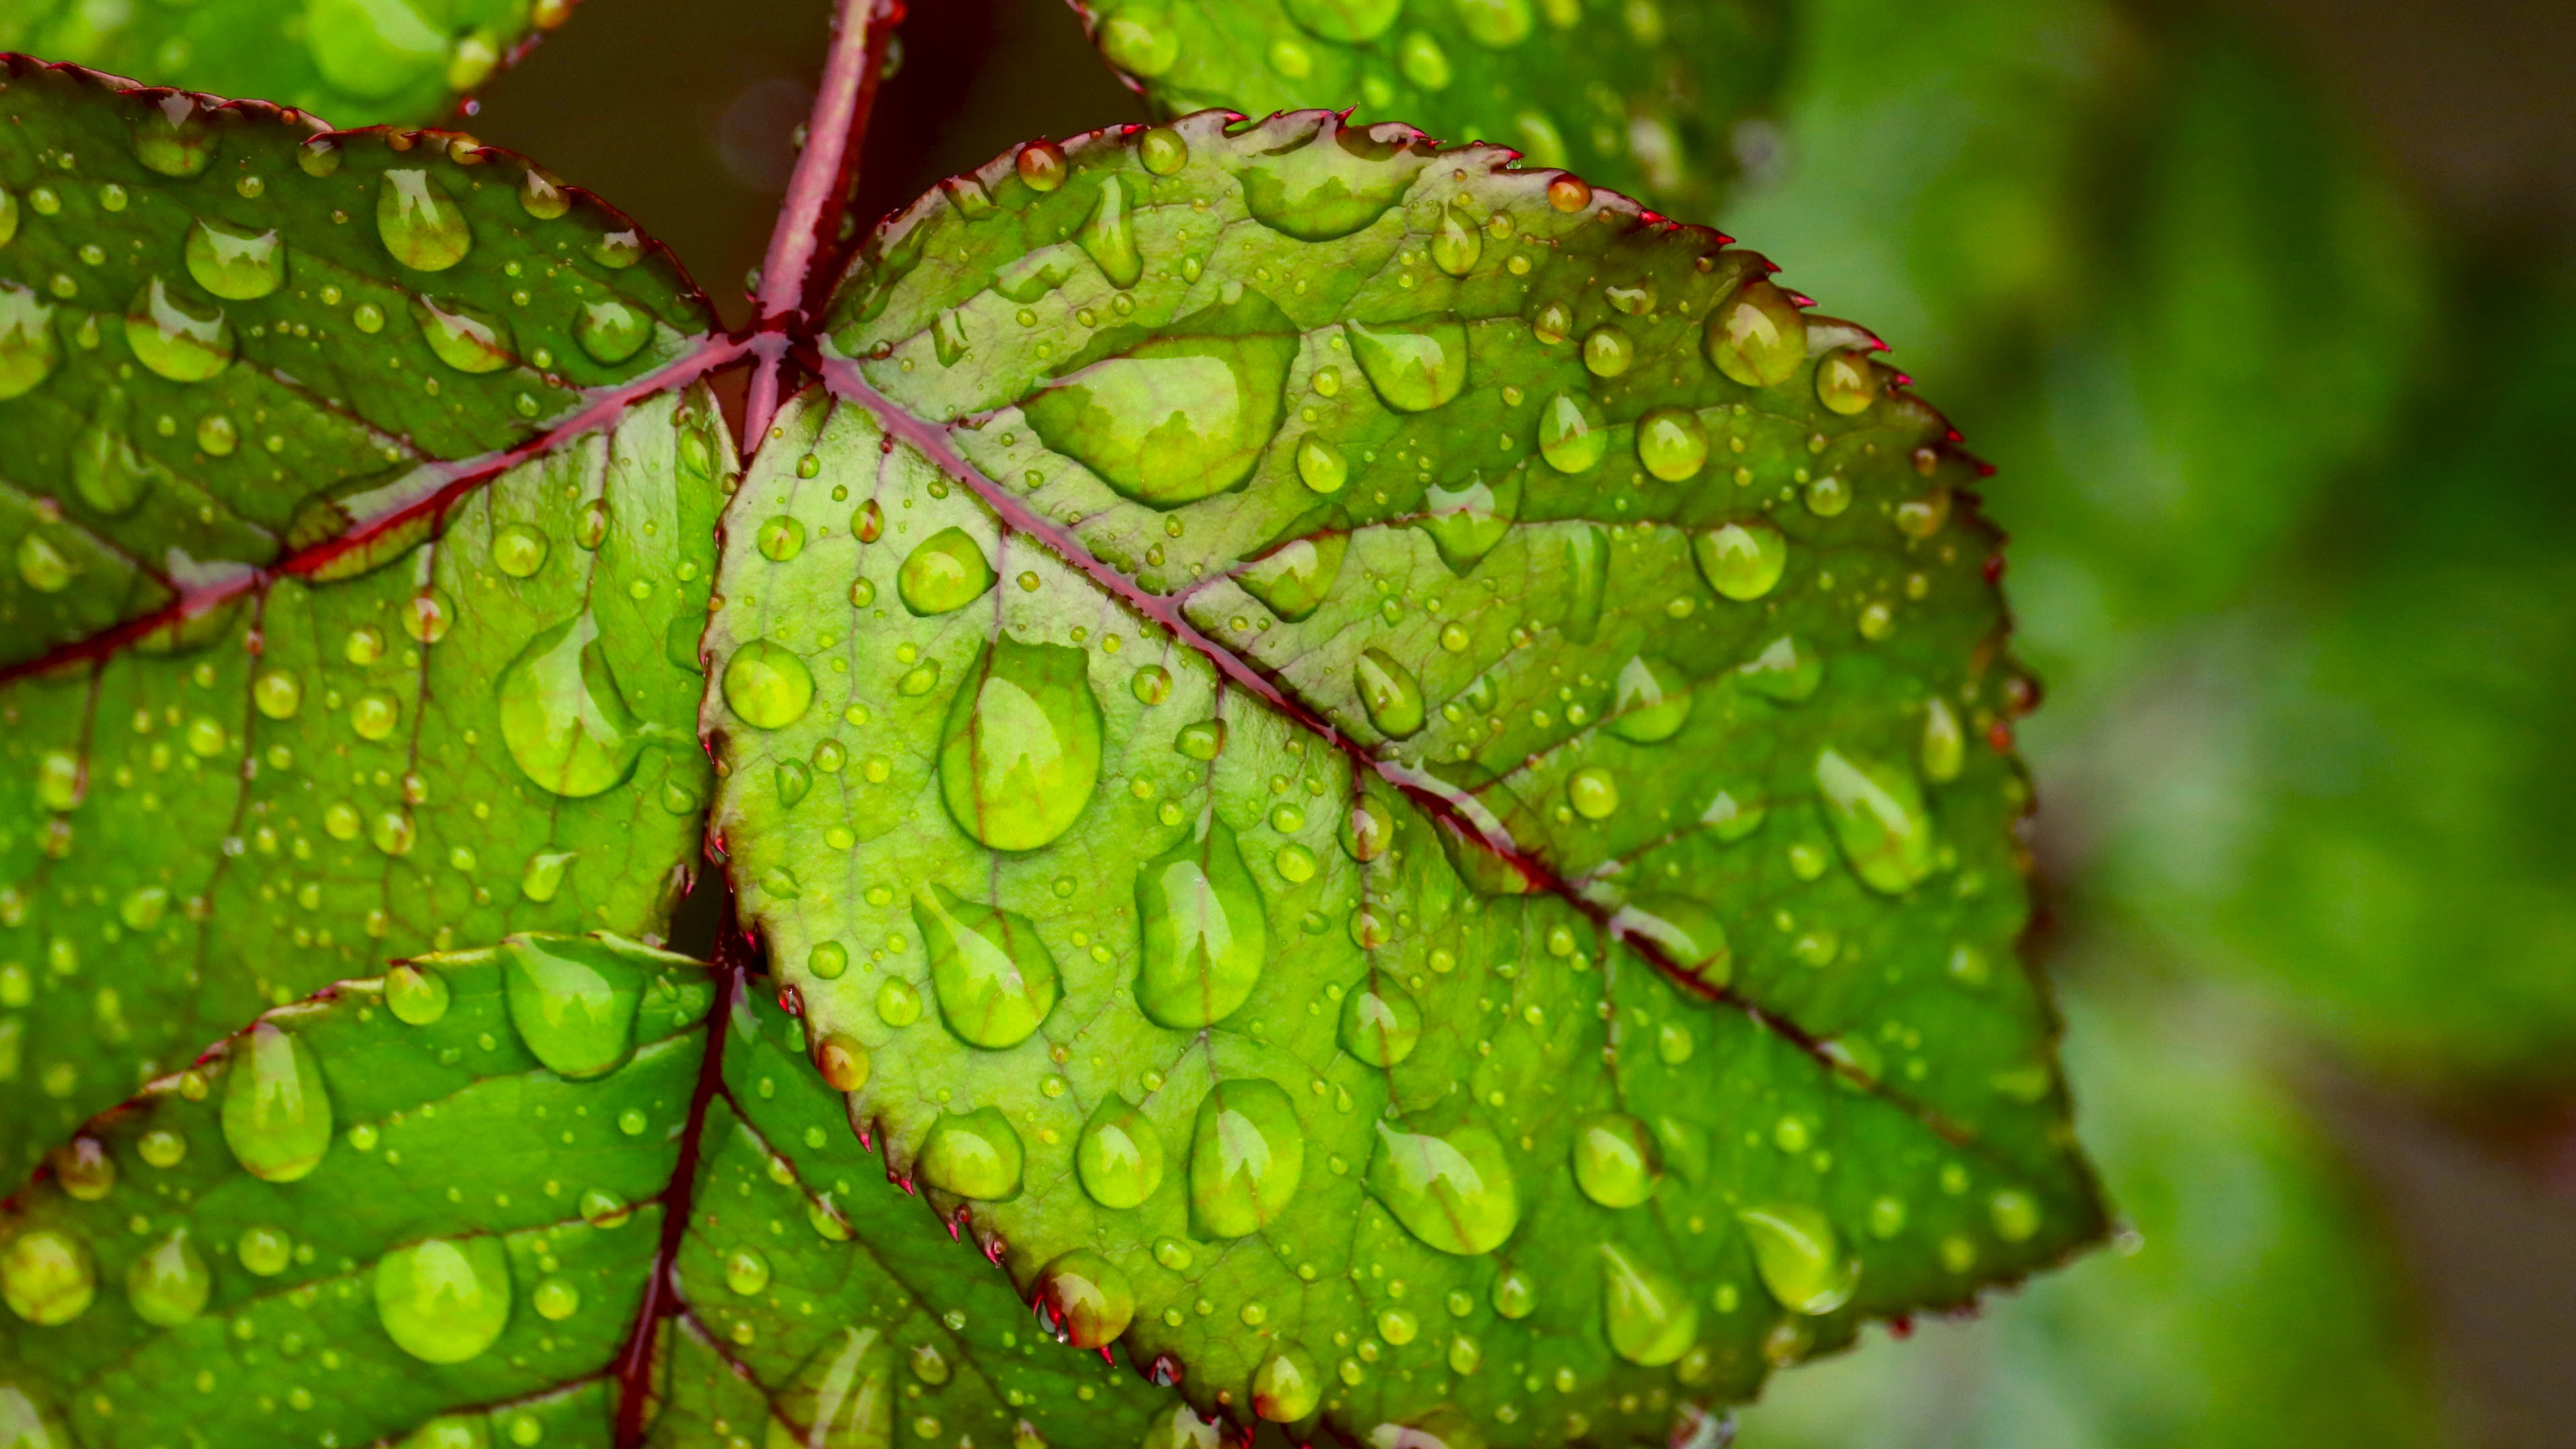 Water droplets on green leaf 4K Ultra HD Wallpapers for Mobile phones  Tablet and PC 3840x2160 : 